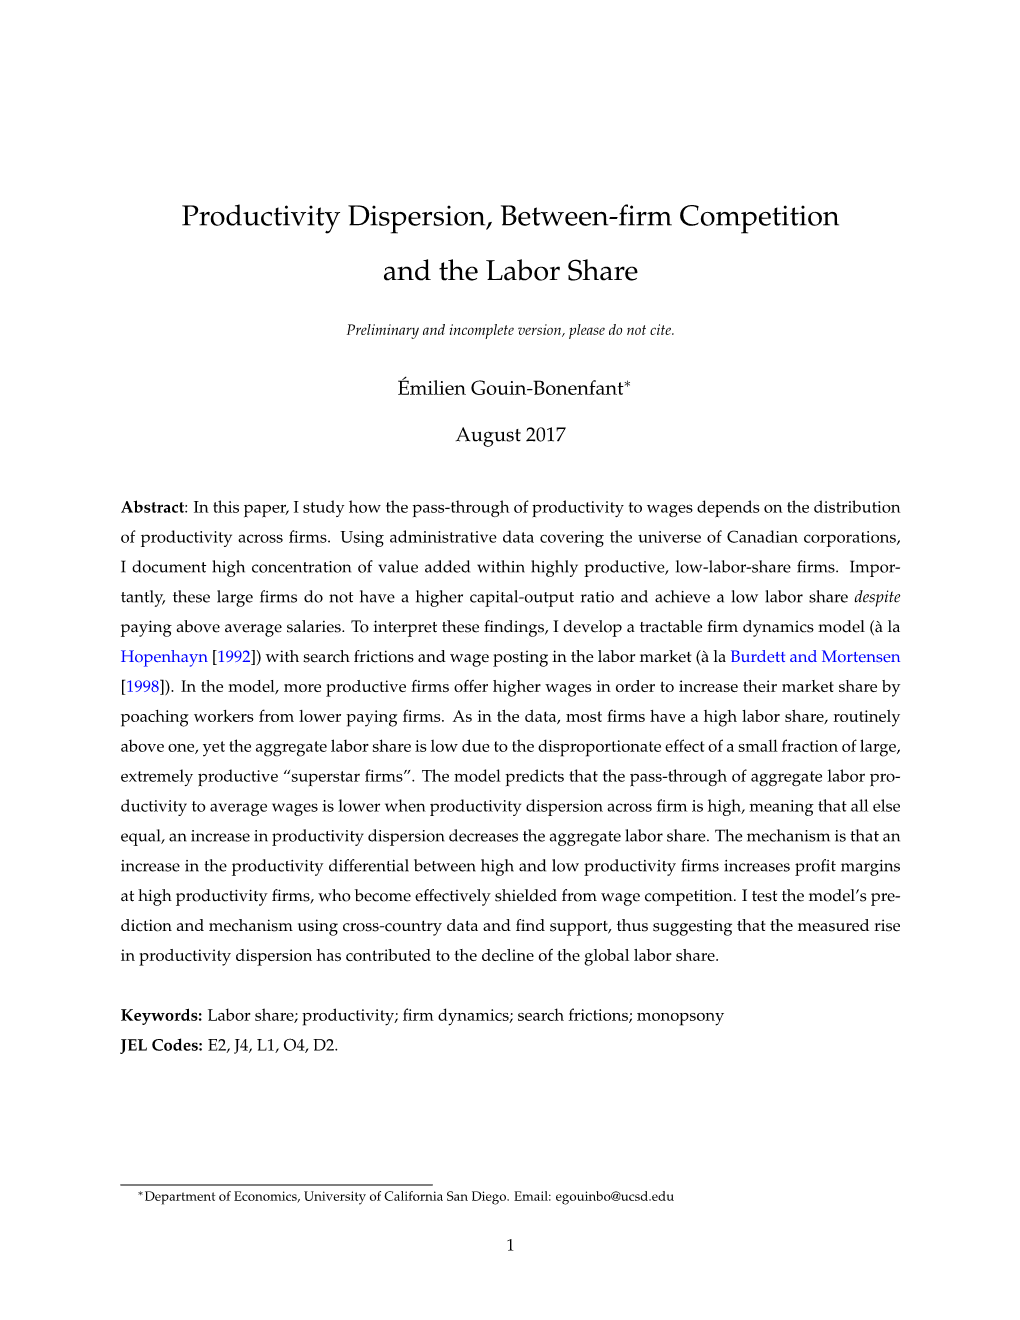 Productivity Dispersion, Between-Firm Competition and the Labor Share